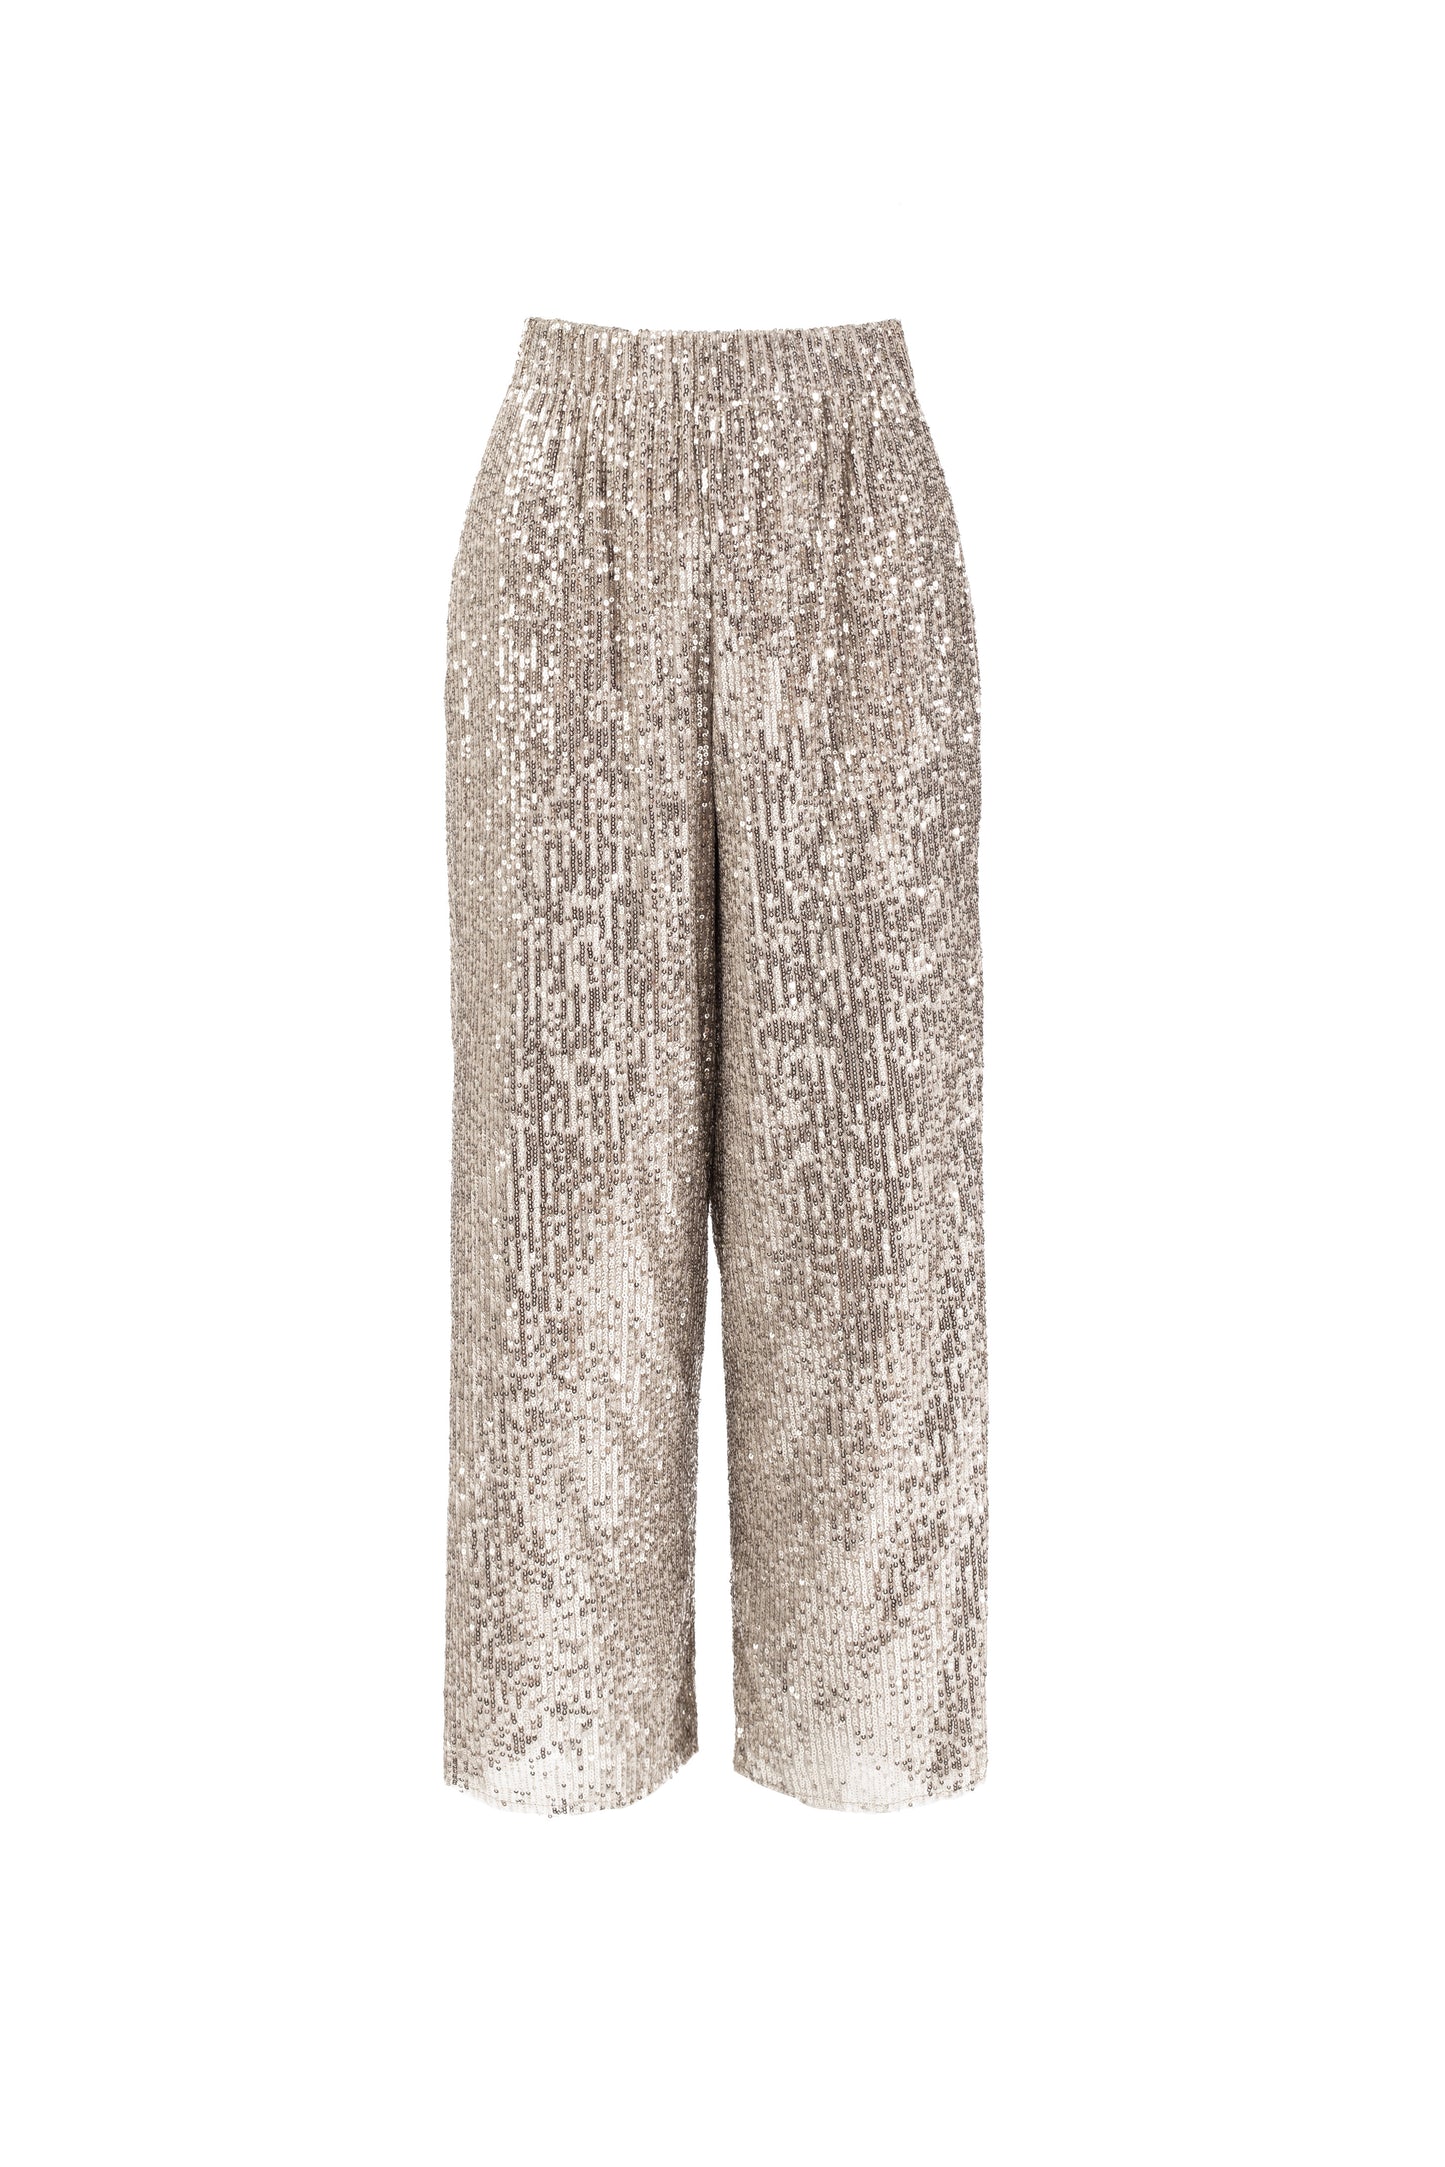 9775 - OUANI - SEQUINS SILVER PANTS -BYOU by Patricia Gouveia